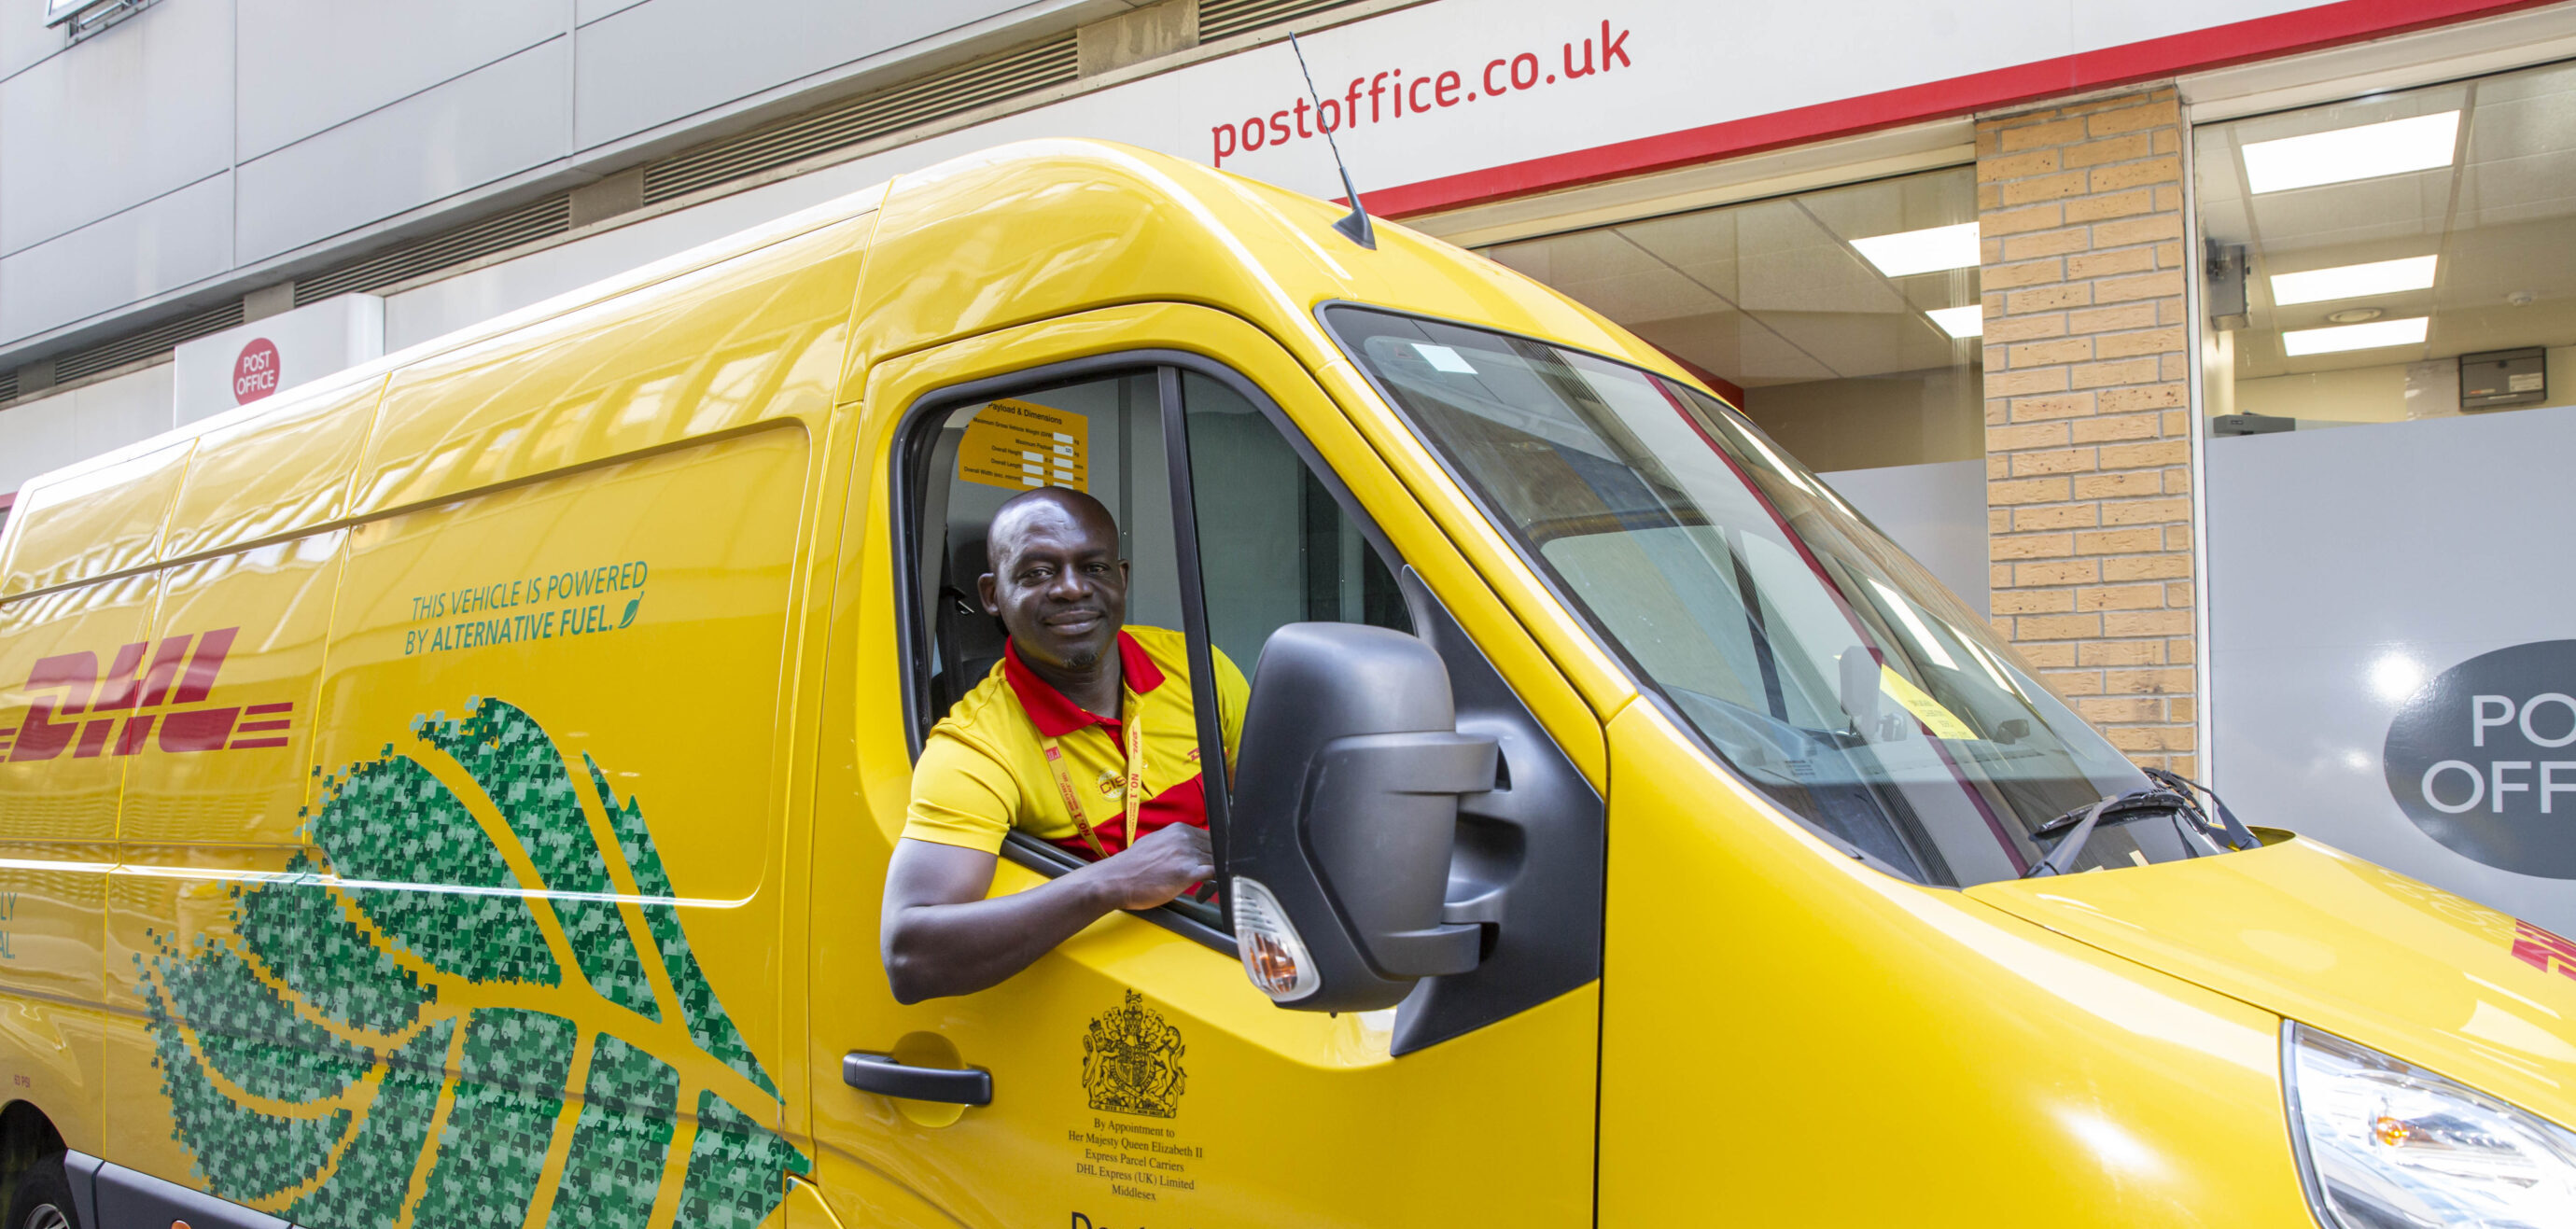 Están familiarizados hacer clic lila Post Office partners with DHL Express to provide click-and-collect service  - Parcel and Postal Technology International